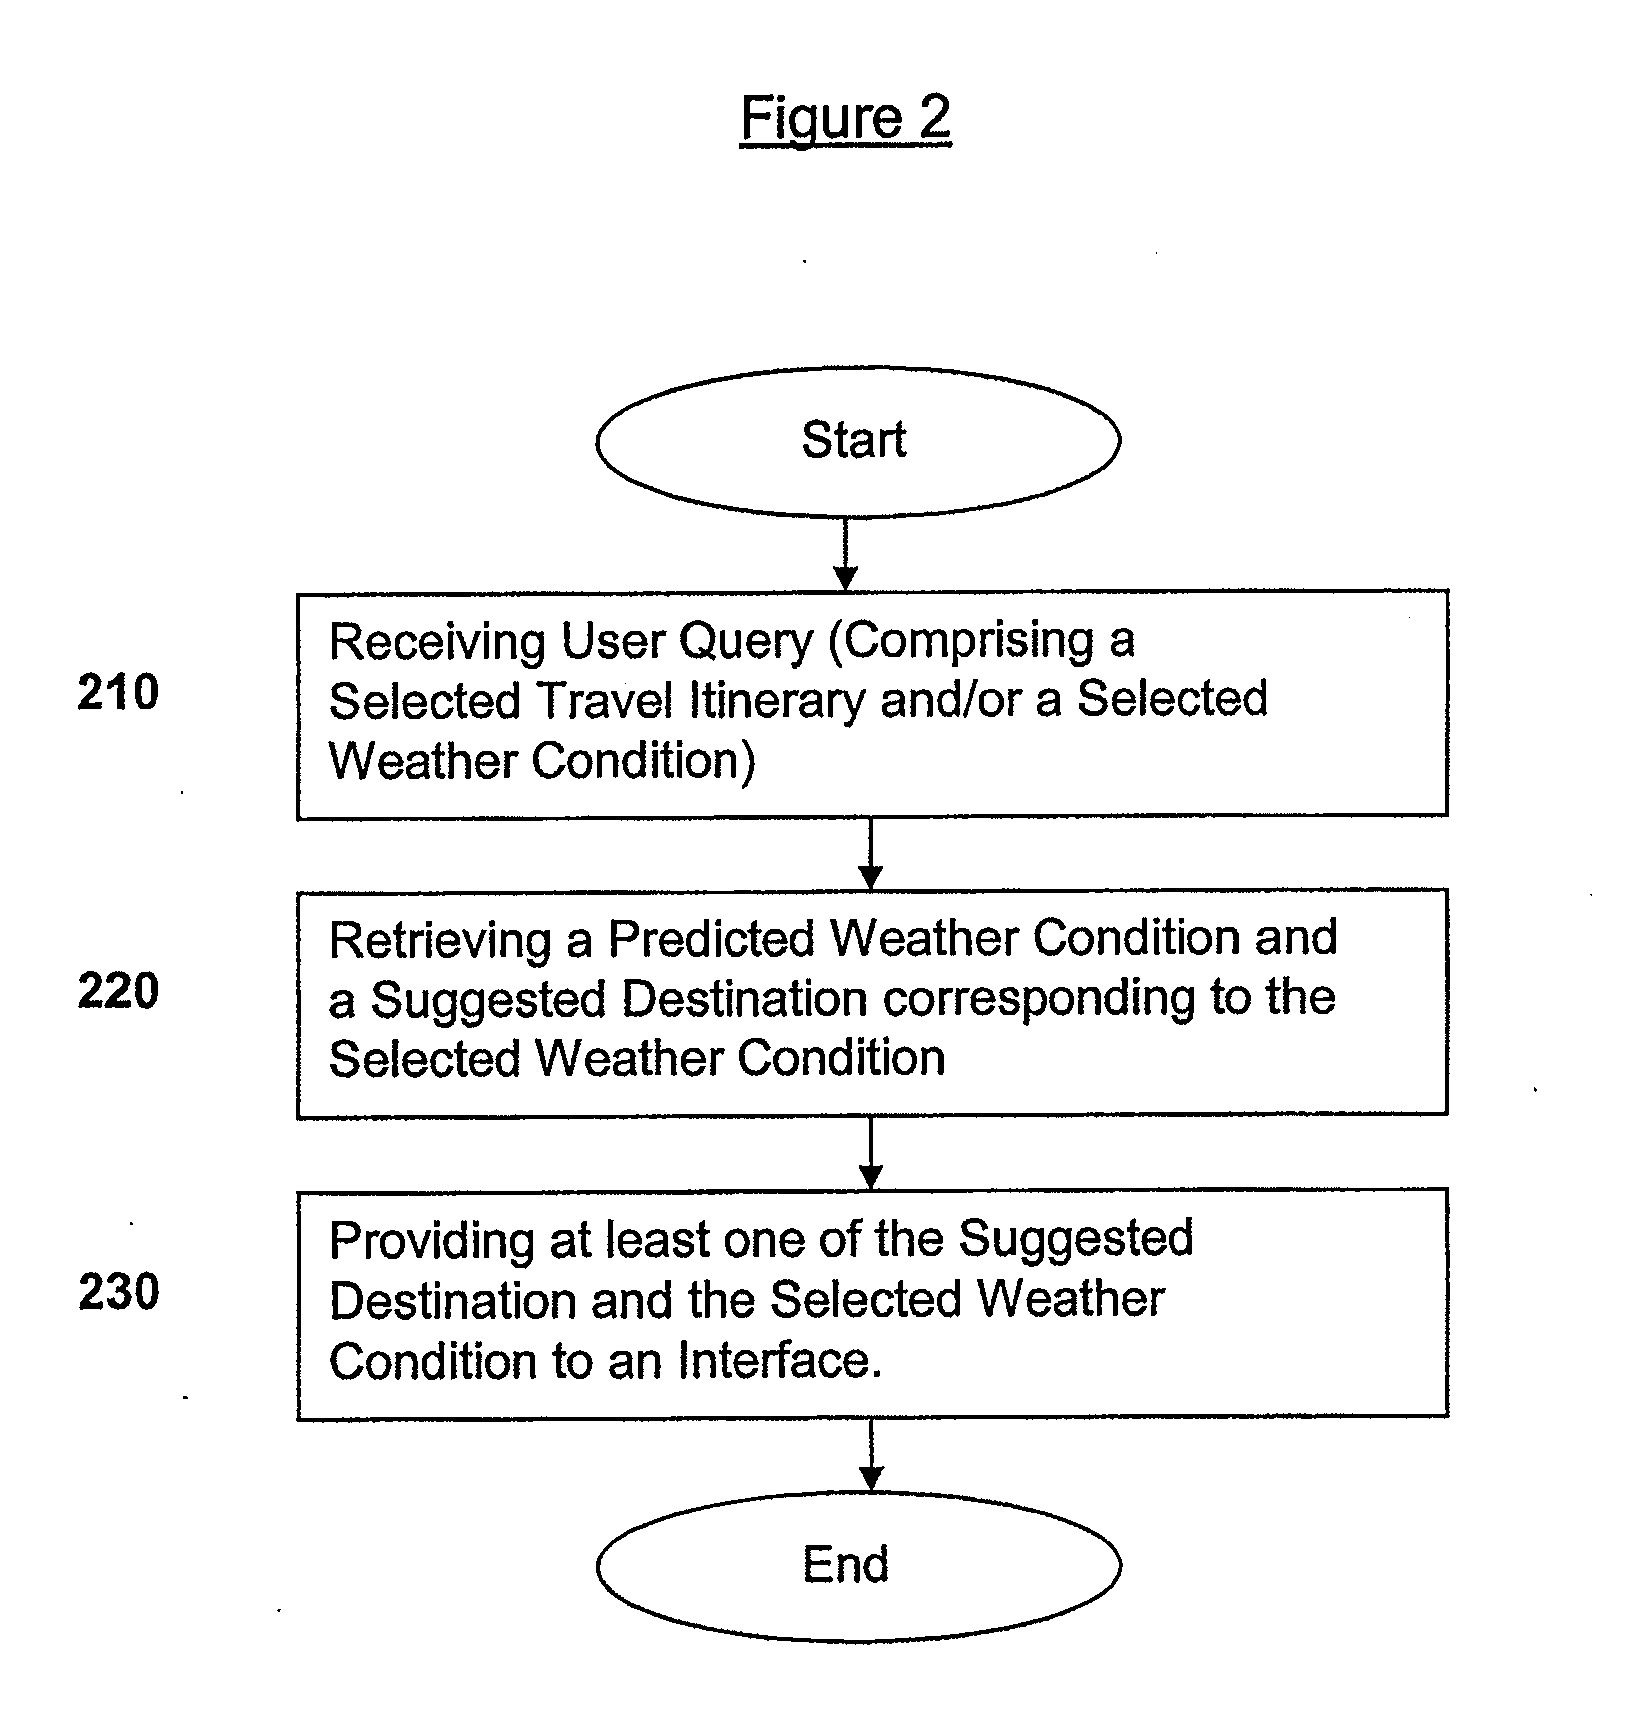 Systems, Methods, and Computer Program Products for Retrieving Predicted Weather Conditions Corresponding to Selected Travel Itineraries Stored in an Inventory System